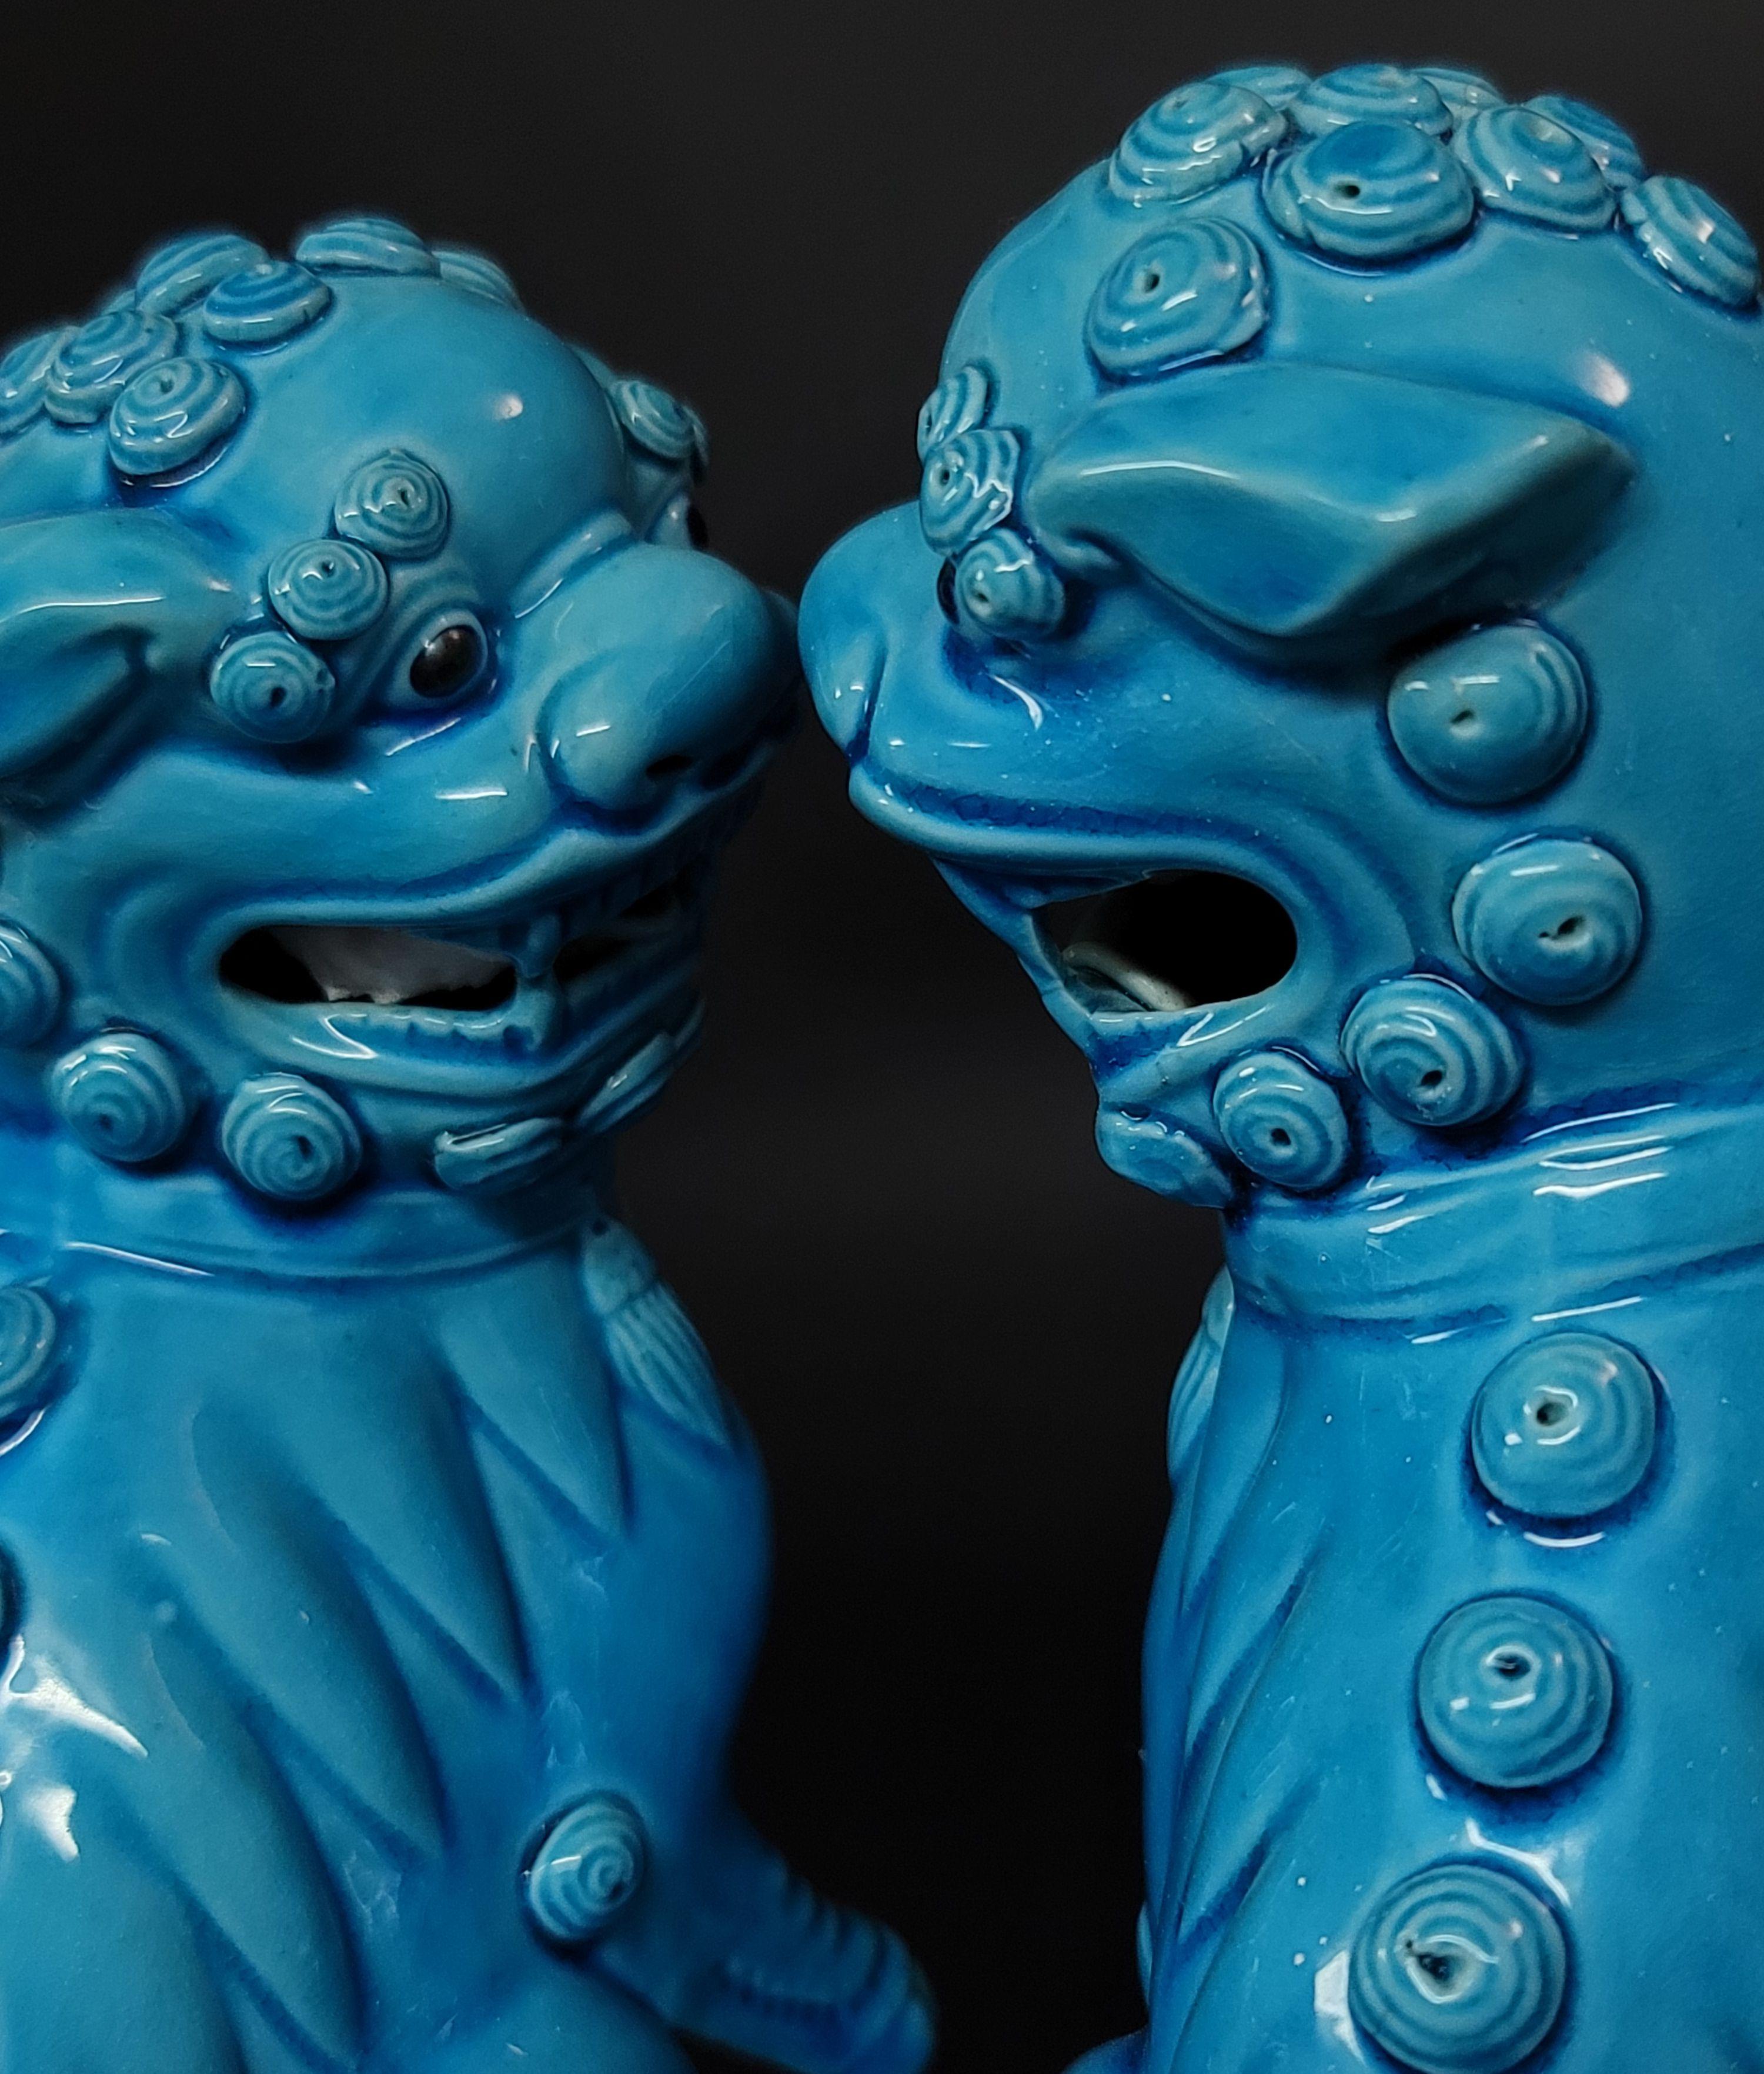 Pair of Chinese Turquoise Glazed Porcelain Mounted Foo Dogs #2 2